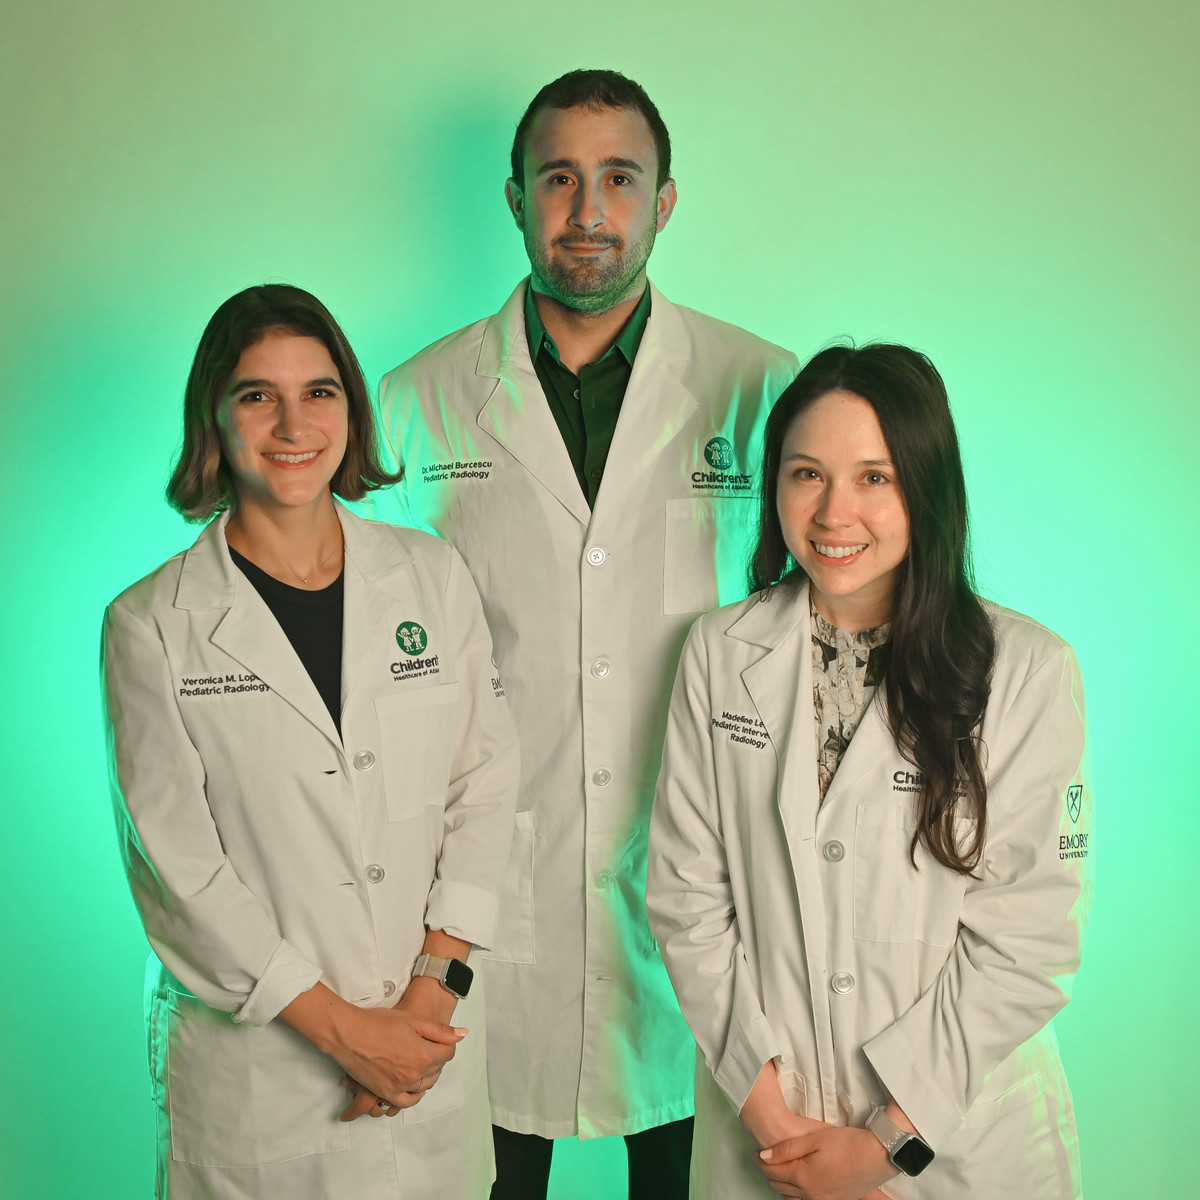 three people wearing white doctor coats over business clothes standing together with a green background